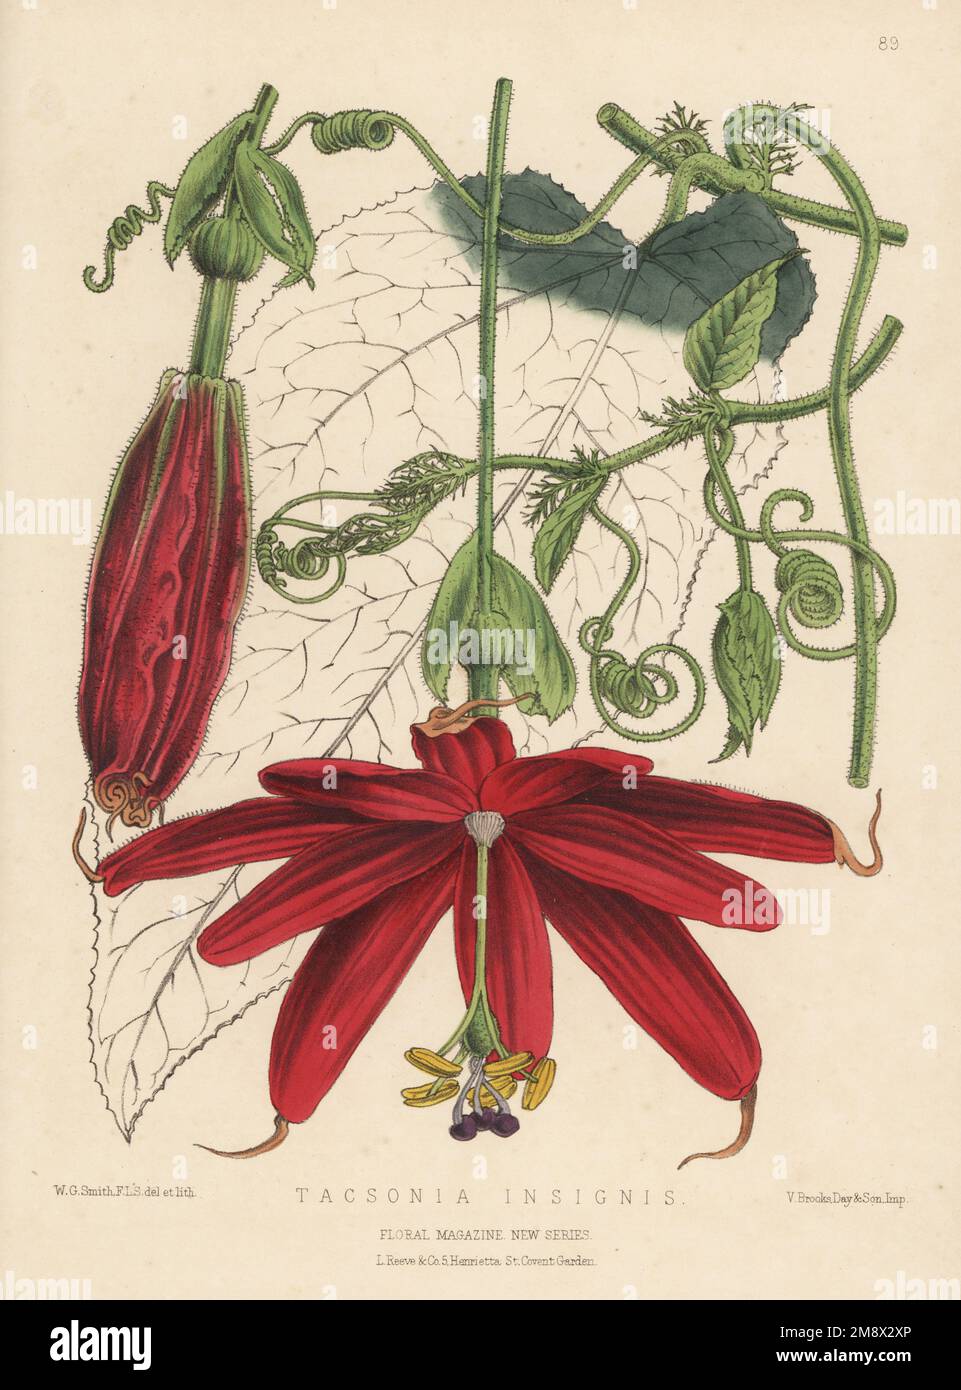 Passion flower or passion vine, Passiflora insignis. Raised by gardener Mr Anderson at Soweby Hall, Hull, from seeds sent from South America (Peru). As Tacsonia insignis. Handcolored botanical illustration drawn and lithographed by Worthington George Smith from Henry Honywood Dombrain's Floral Magazine, New Series, Volume 2, L. Reeve, London, 1873. Lithograph printed  by Vincent Brooks, Day & Son. Stock Photo